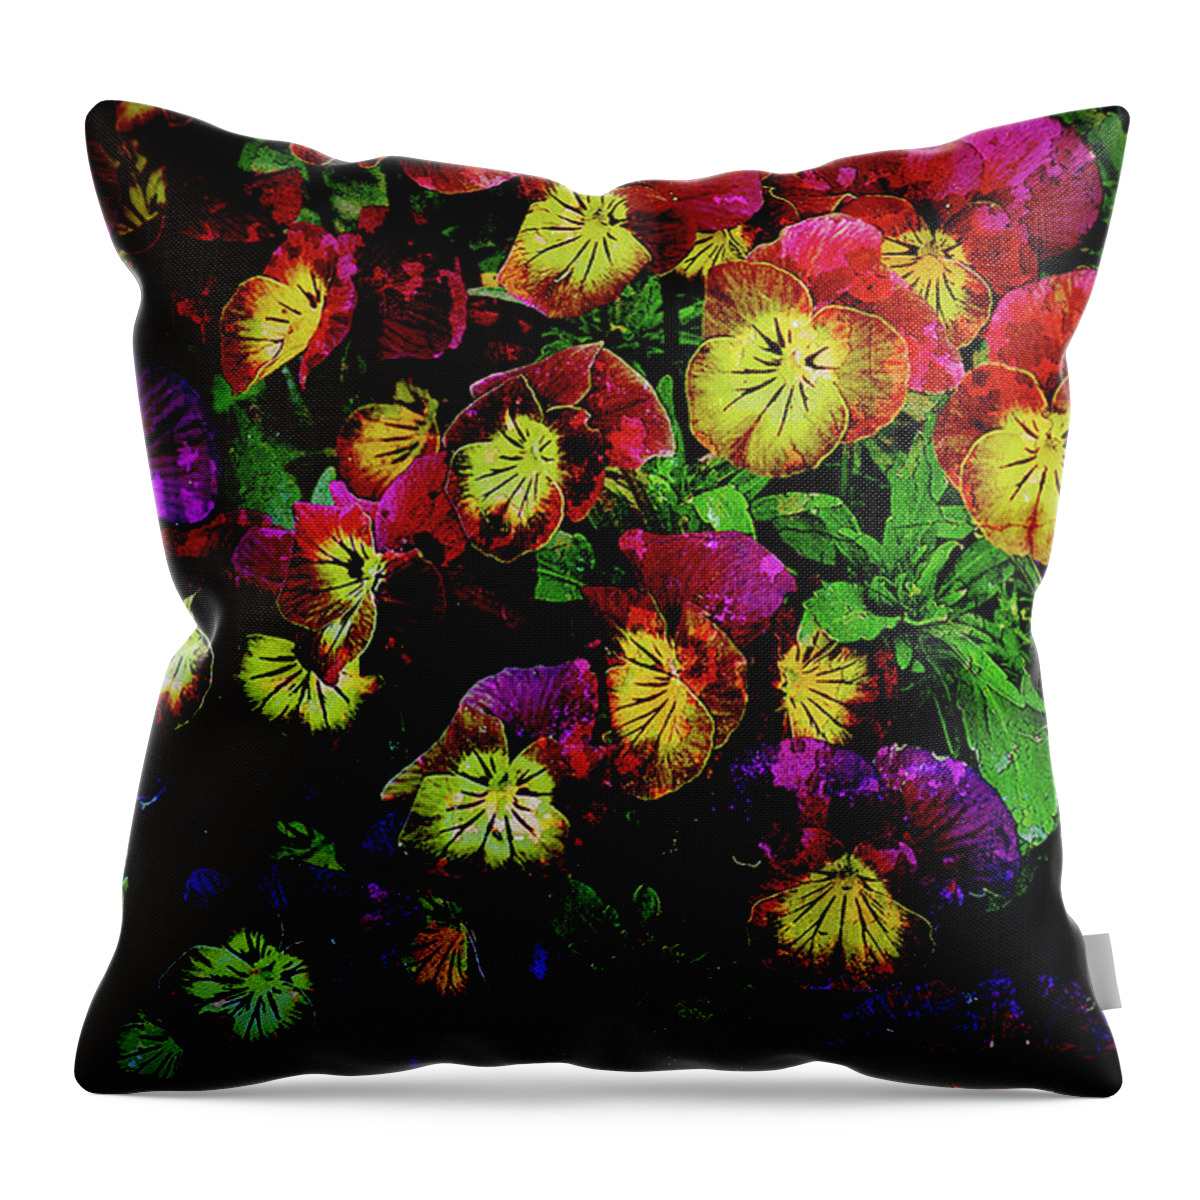 Texture Throw Pillow featuring the photograph Texture Flowers #31 by Prince Andre Faubert